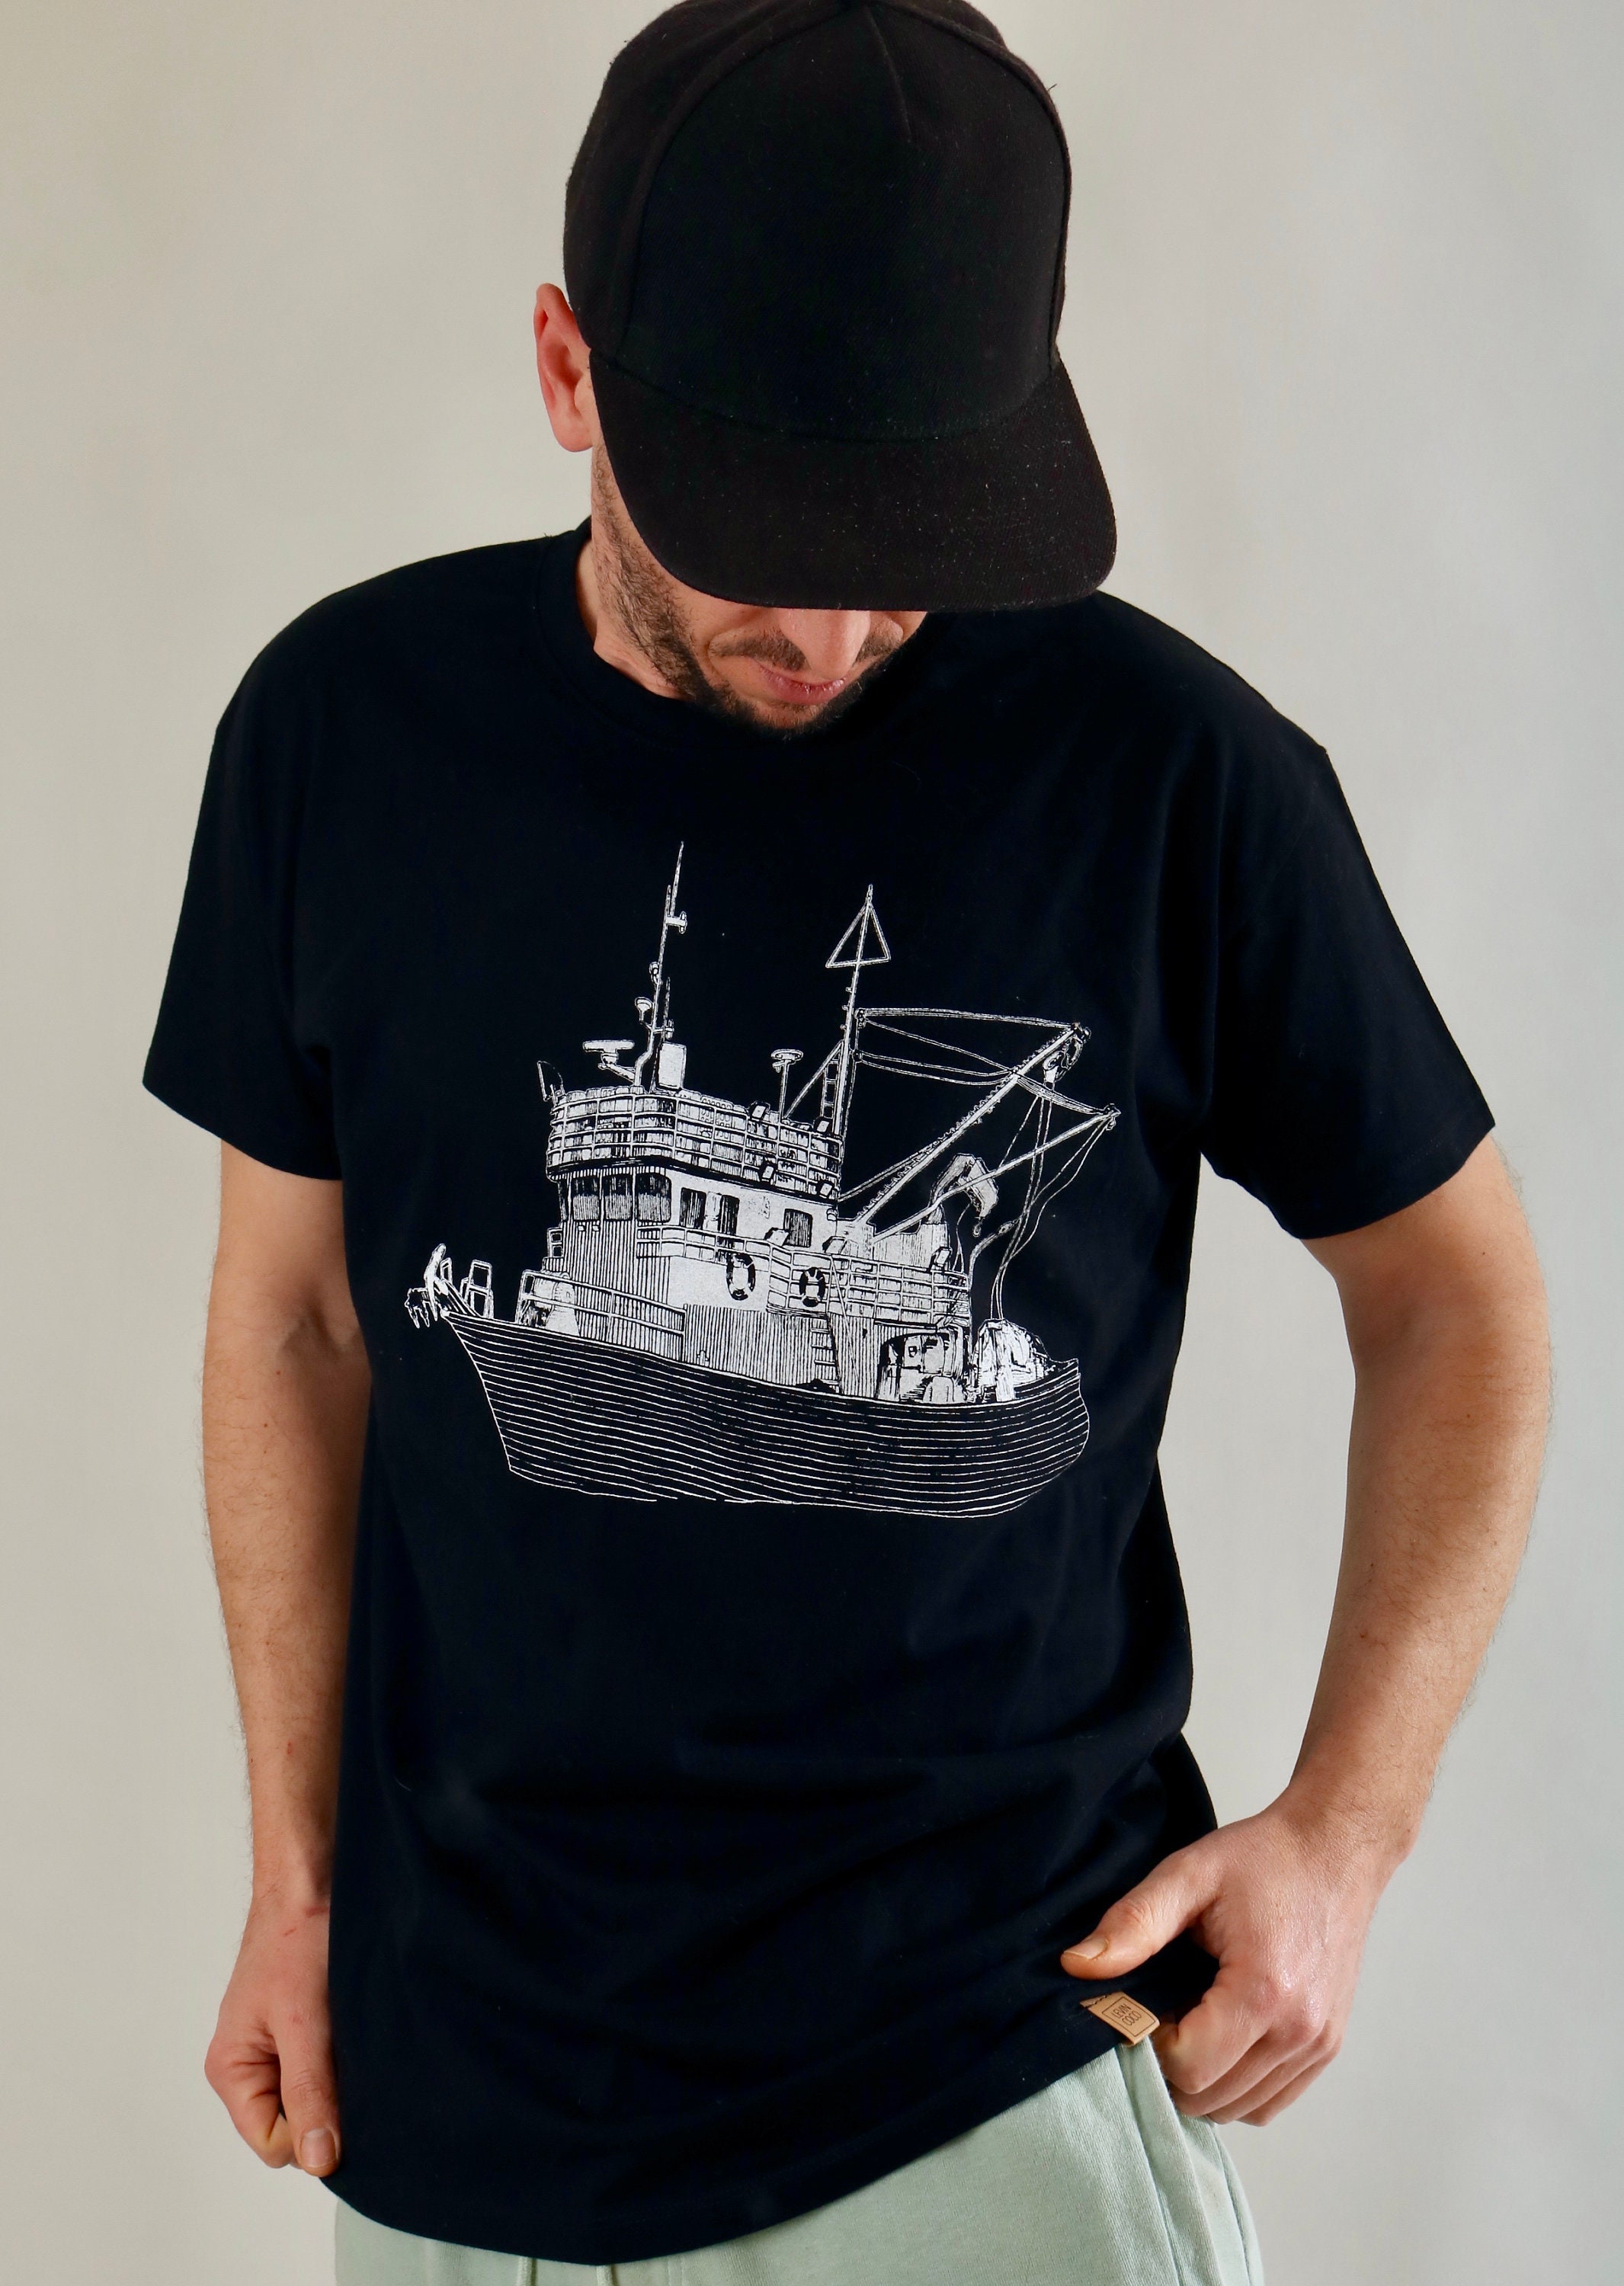 Screen printed graphic on T-shirt - FISHING BOAT